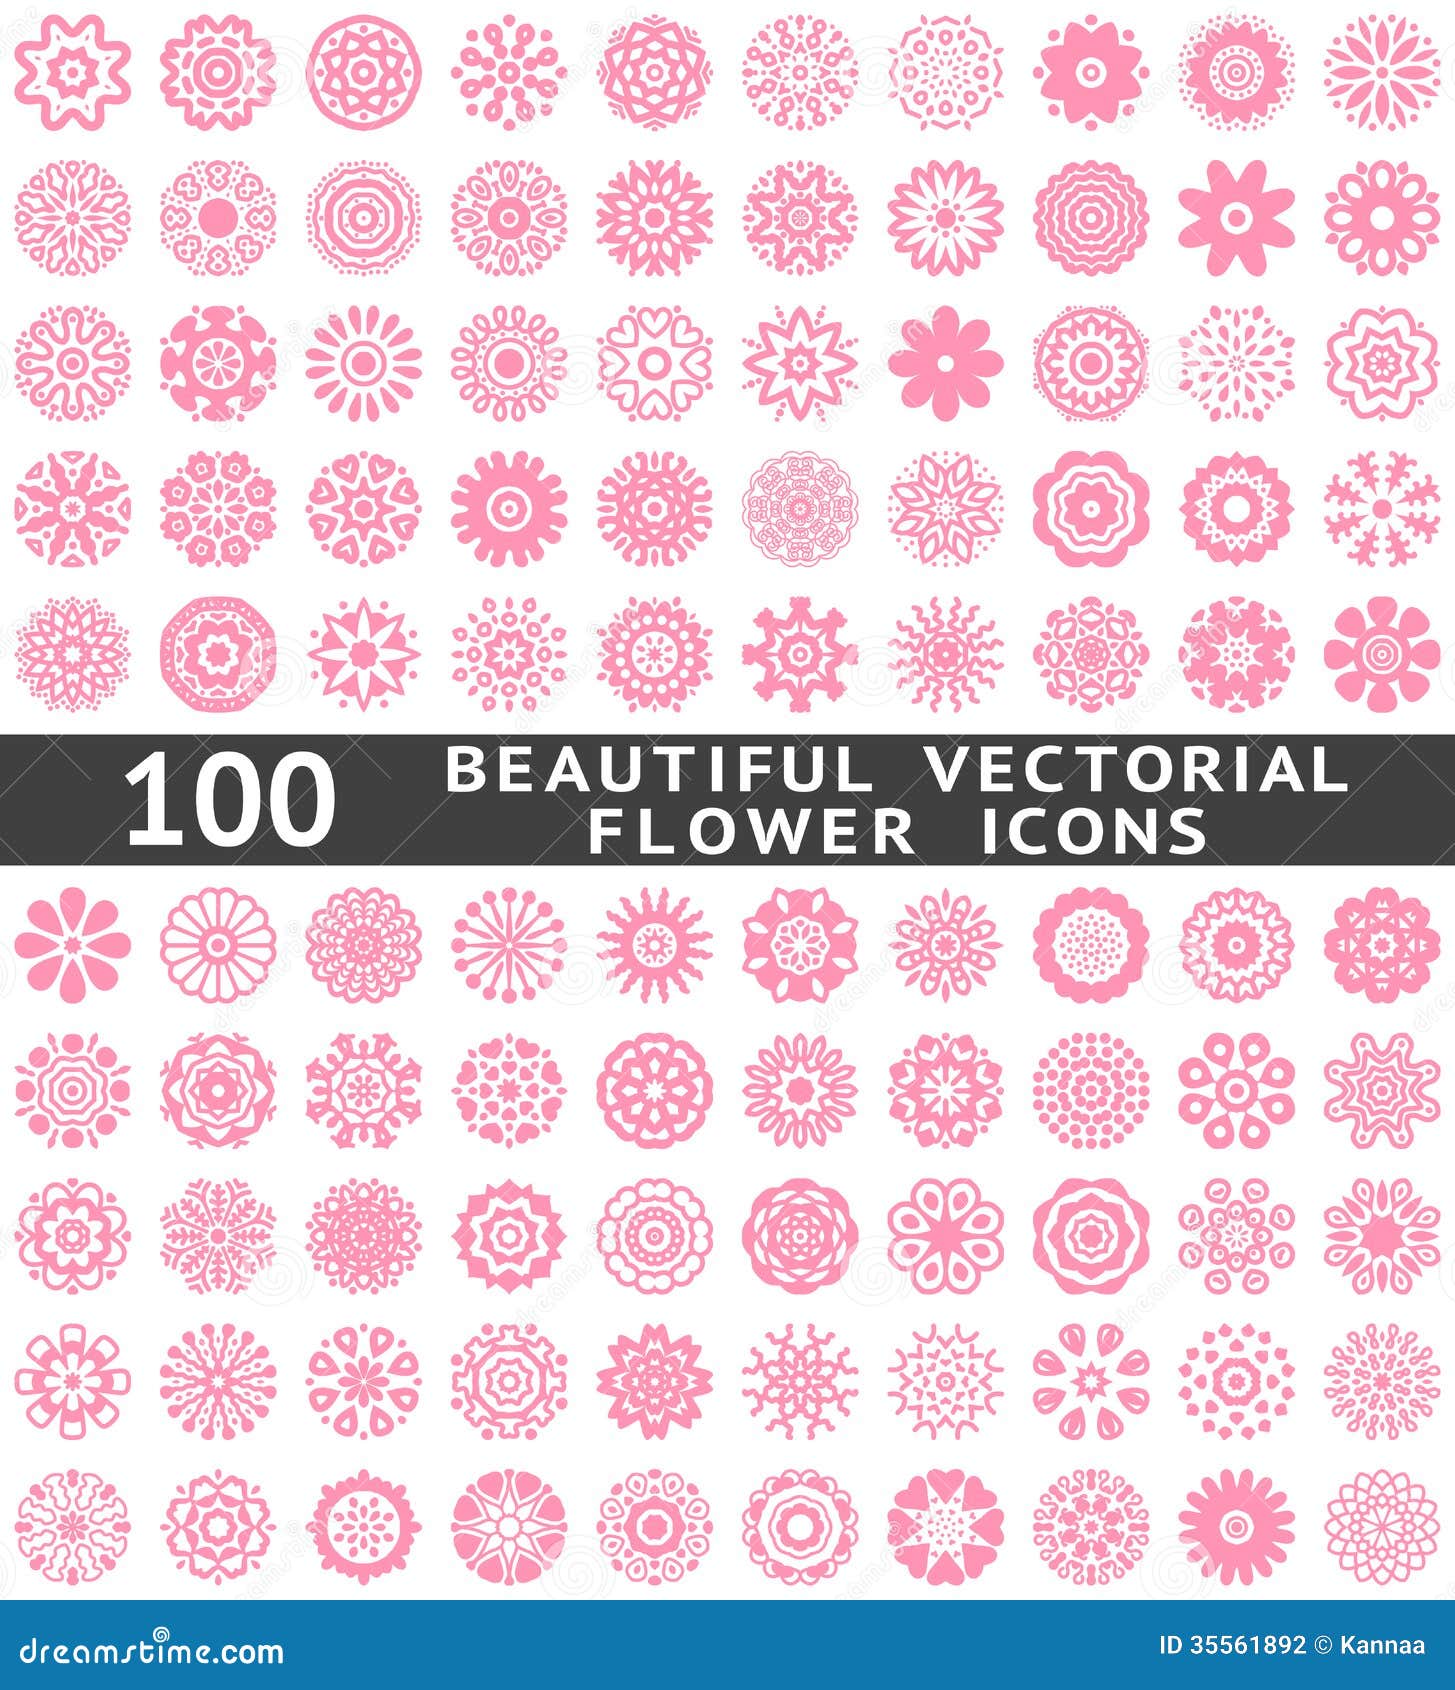 Download Beautiful Abstract Flower Icons. Vector Stock Vector - Image: 35561892